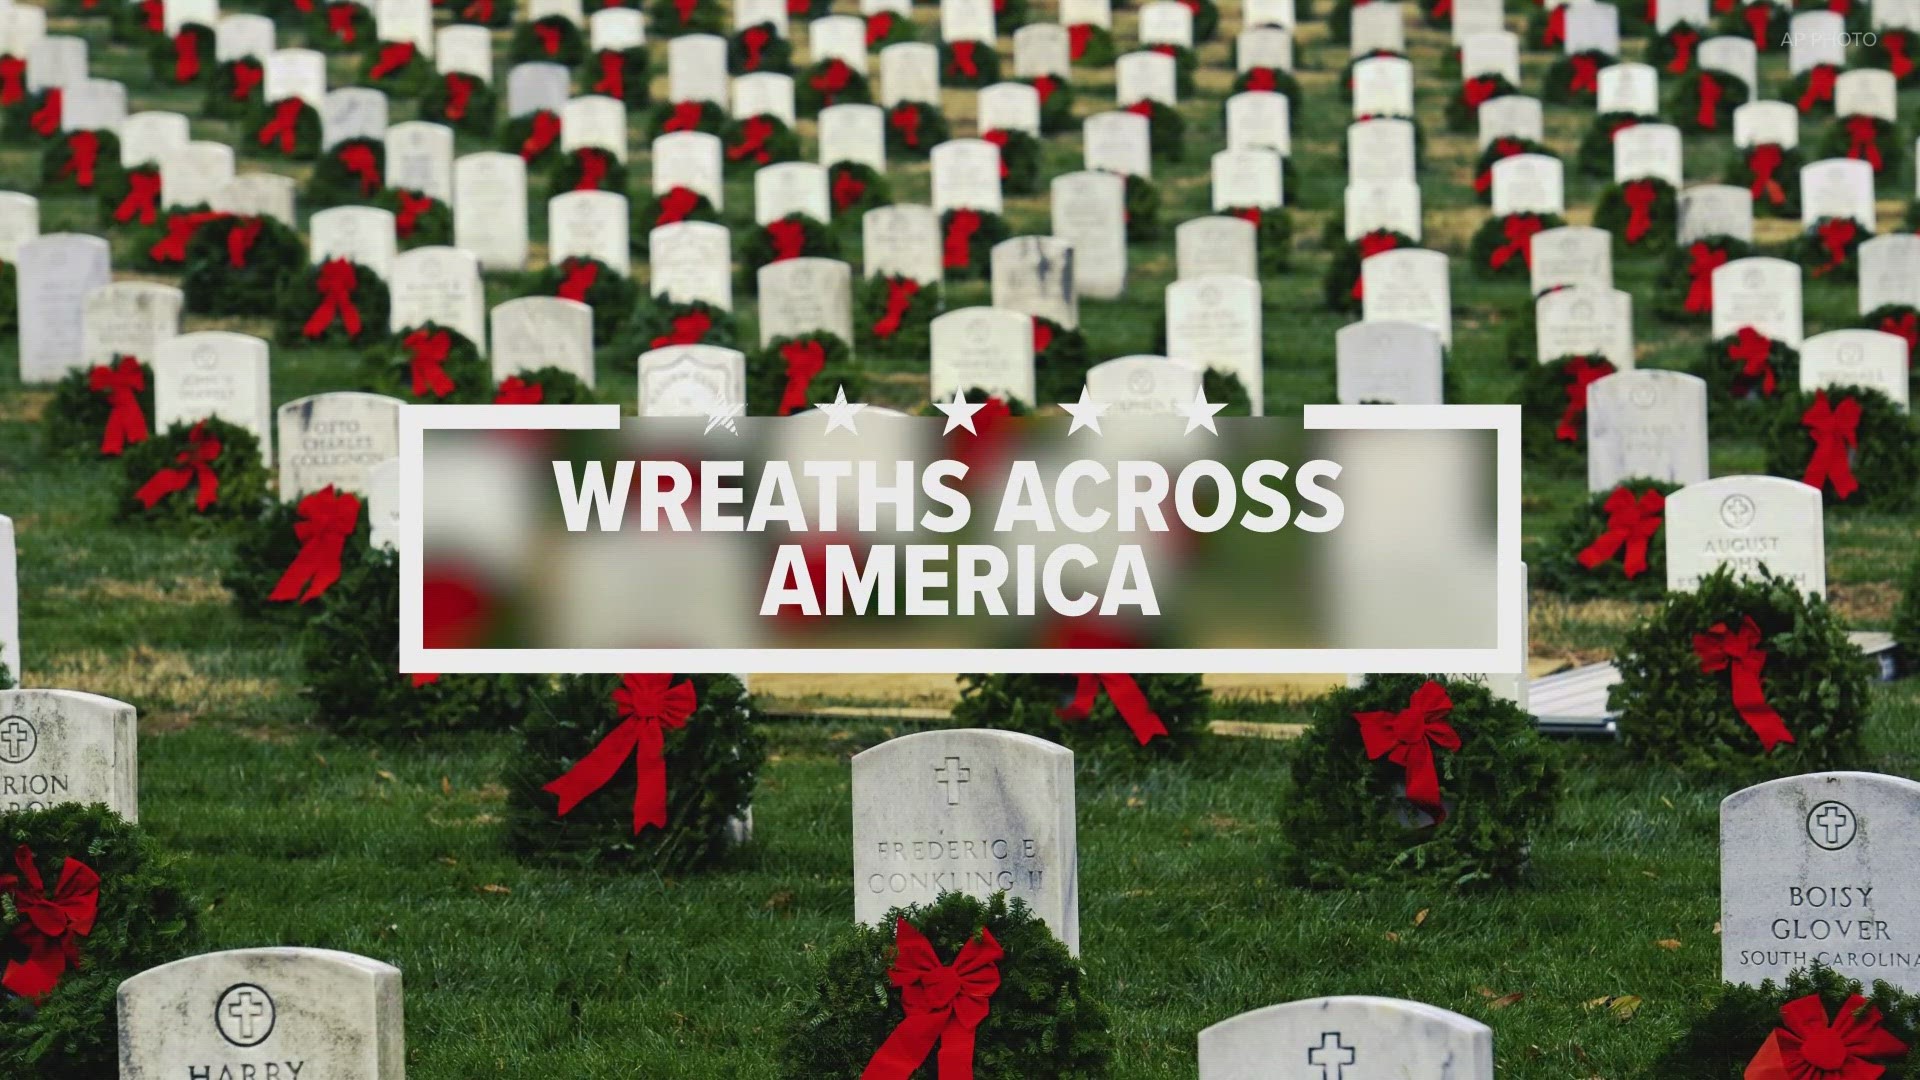 The Wreaths Across America ceremony at Fort Logan National Cemetery will start at 10 a.m. Saturday at the Committal Shelter A.